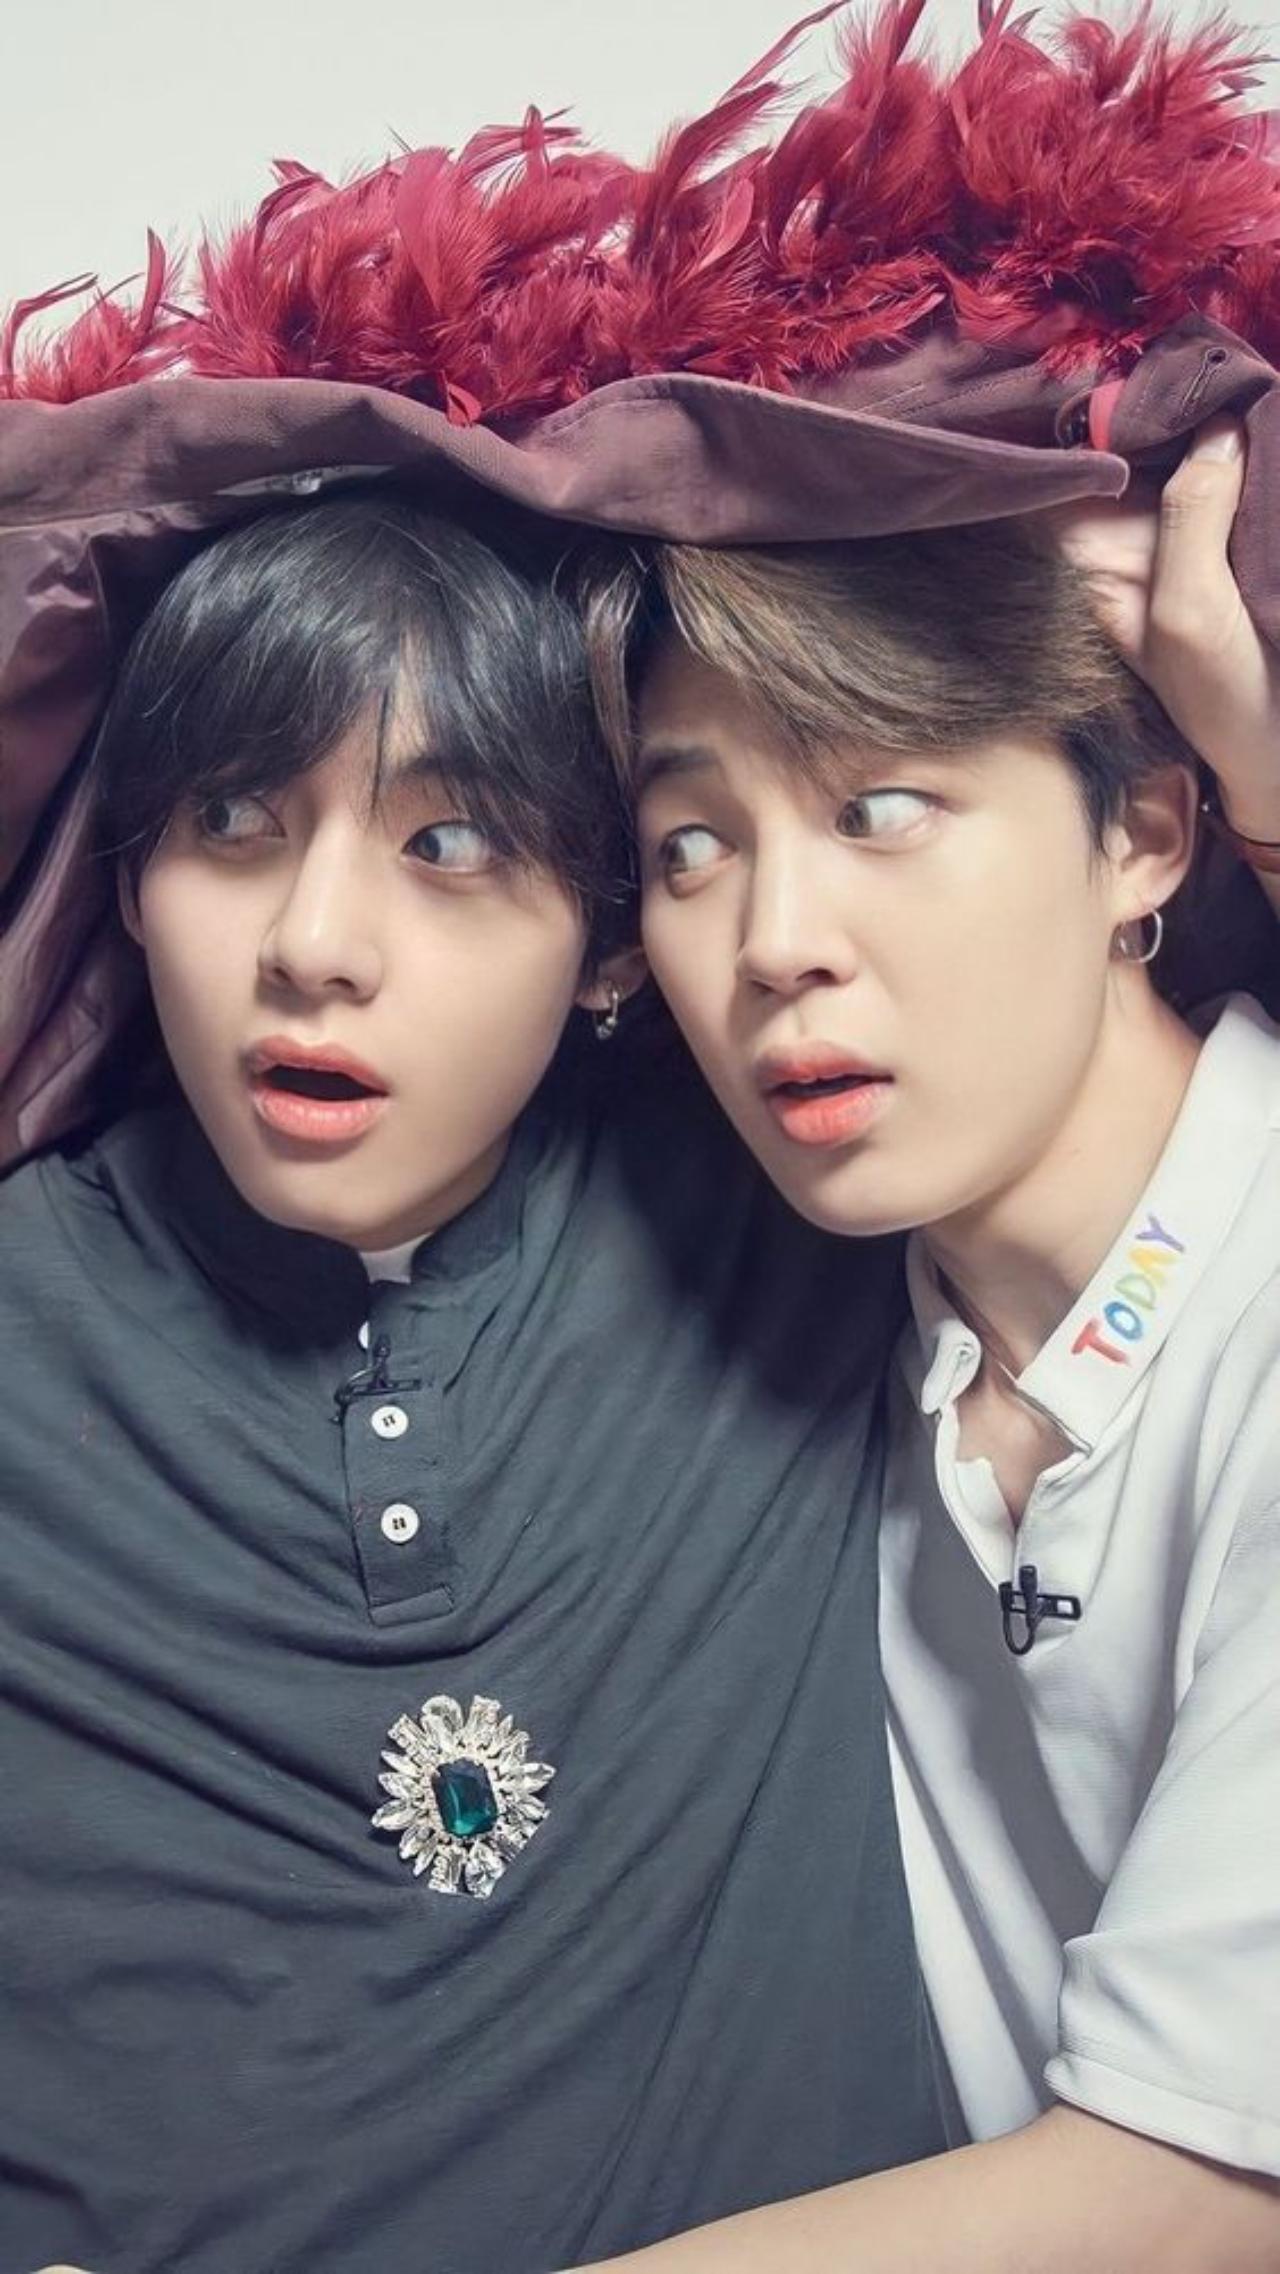 The '95 liners bring an infectious energy to the group. Jimin and Taehyung are always partners-in-crime - be it while troubling their older hyungs J-Hope and Jin, goofing out or pranking the other members or being each other's most trusted confidantes. Their sweet hugs say it all!